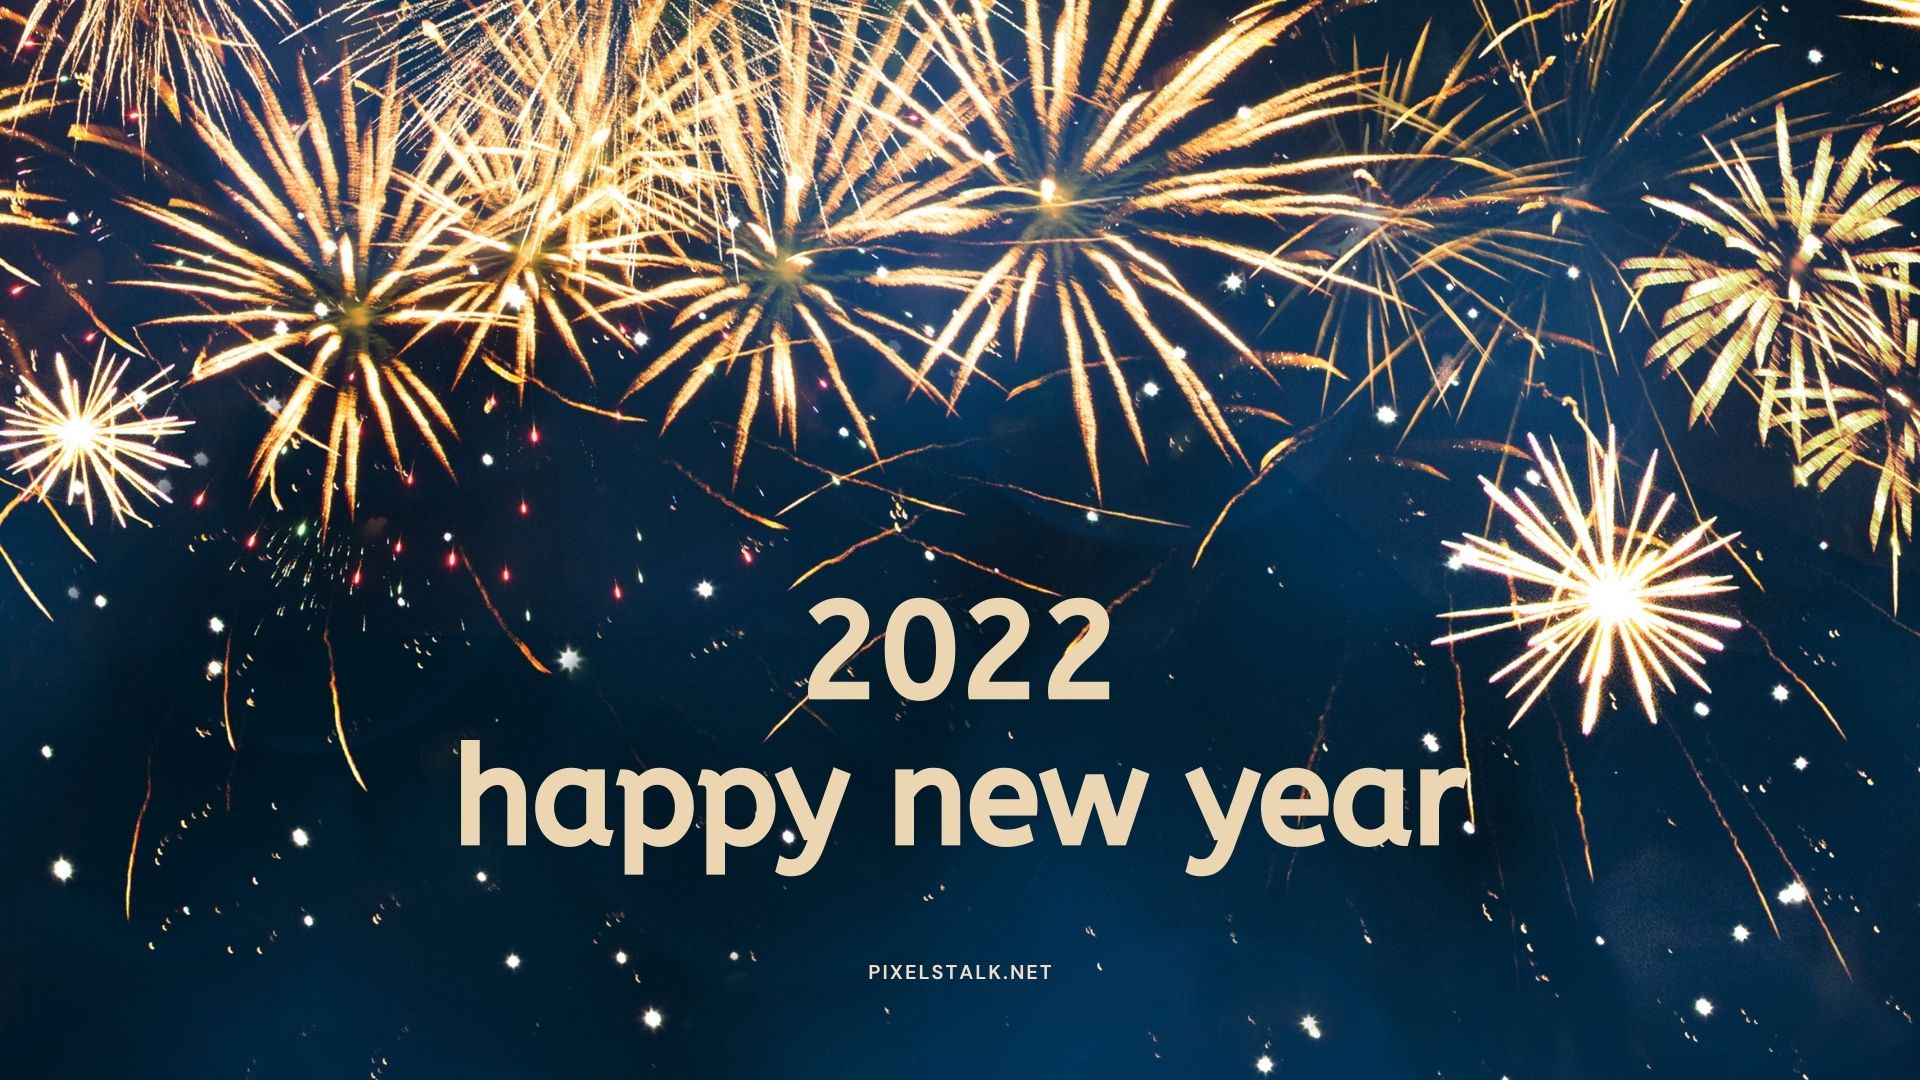 Happy New Year 2022 Wallpapers - Top Best 2022 Happy New Year Backgrounds  Download